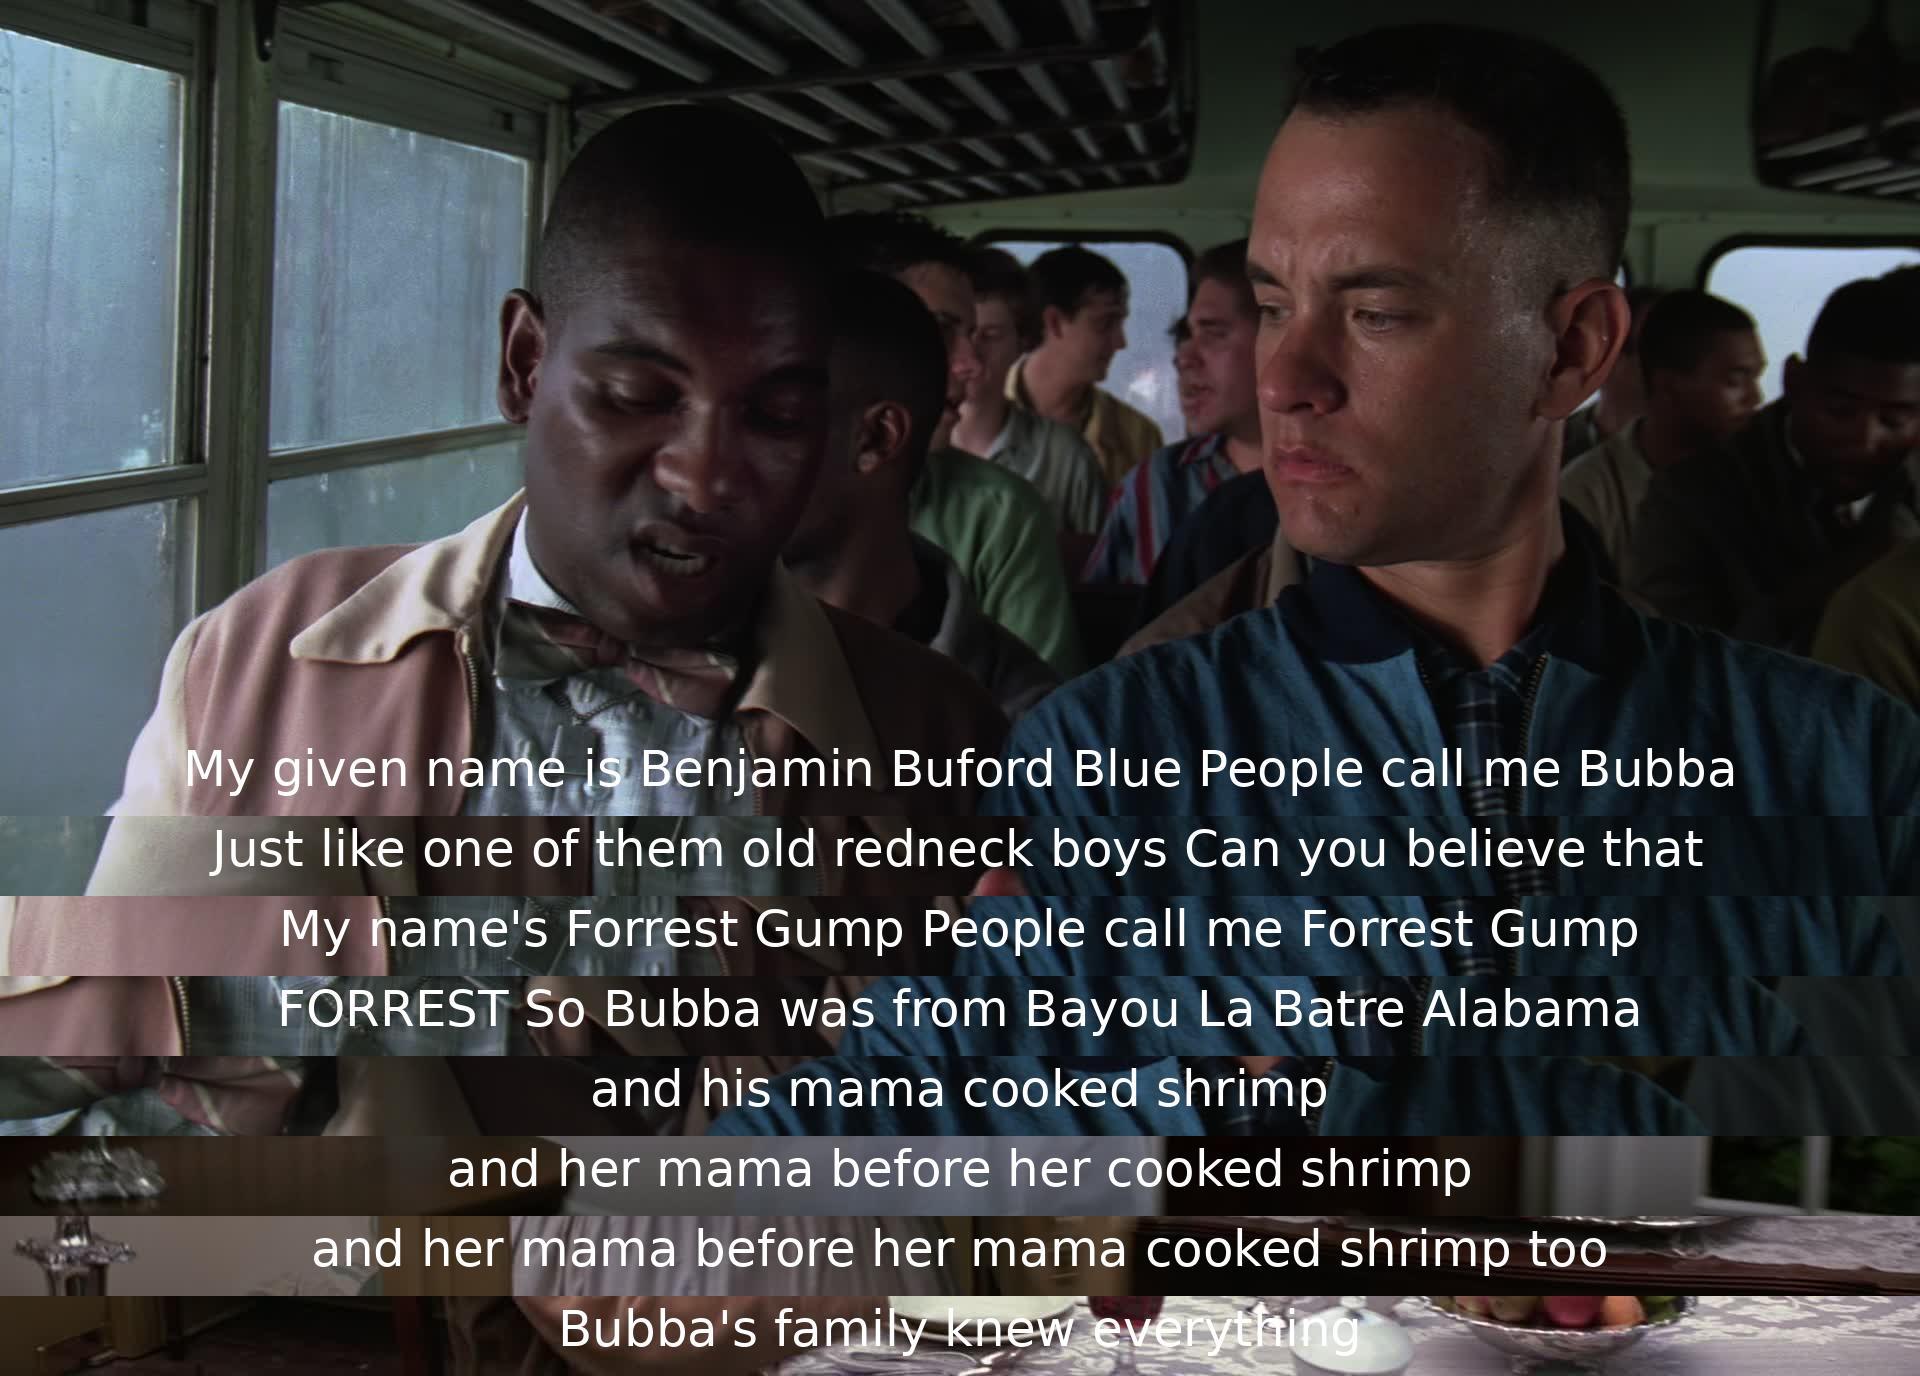 Benjamin Buford Blue introduces himself as Bubba, telling Forrest Gump about his family’s shrimp-cooking heritage from Bayou La Batre, Alabama. Forrest reveals his own name and Bubba details their generational shrimp-crafting knowledge.